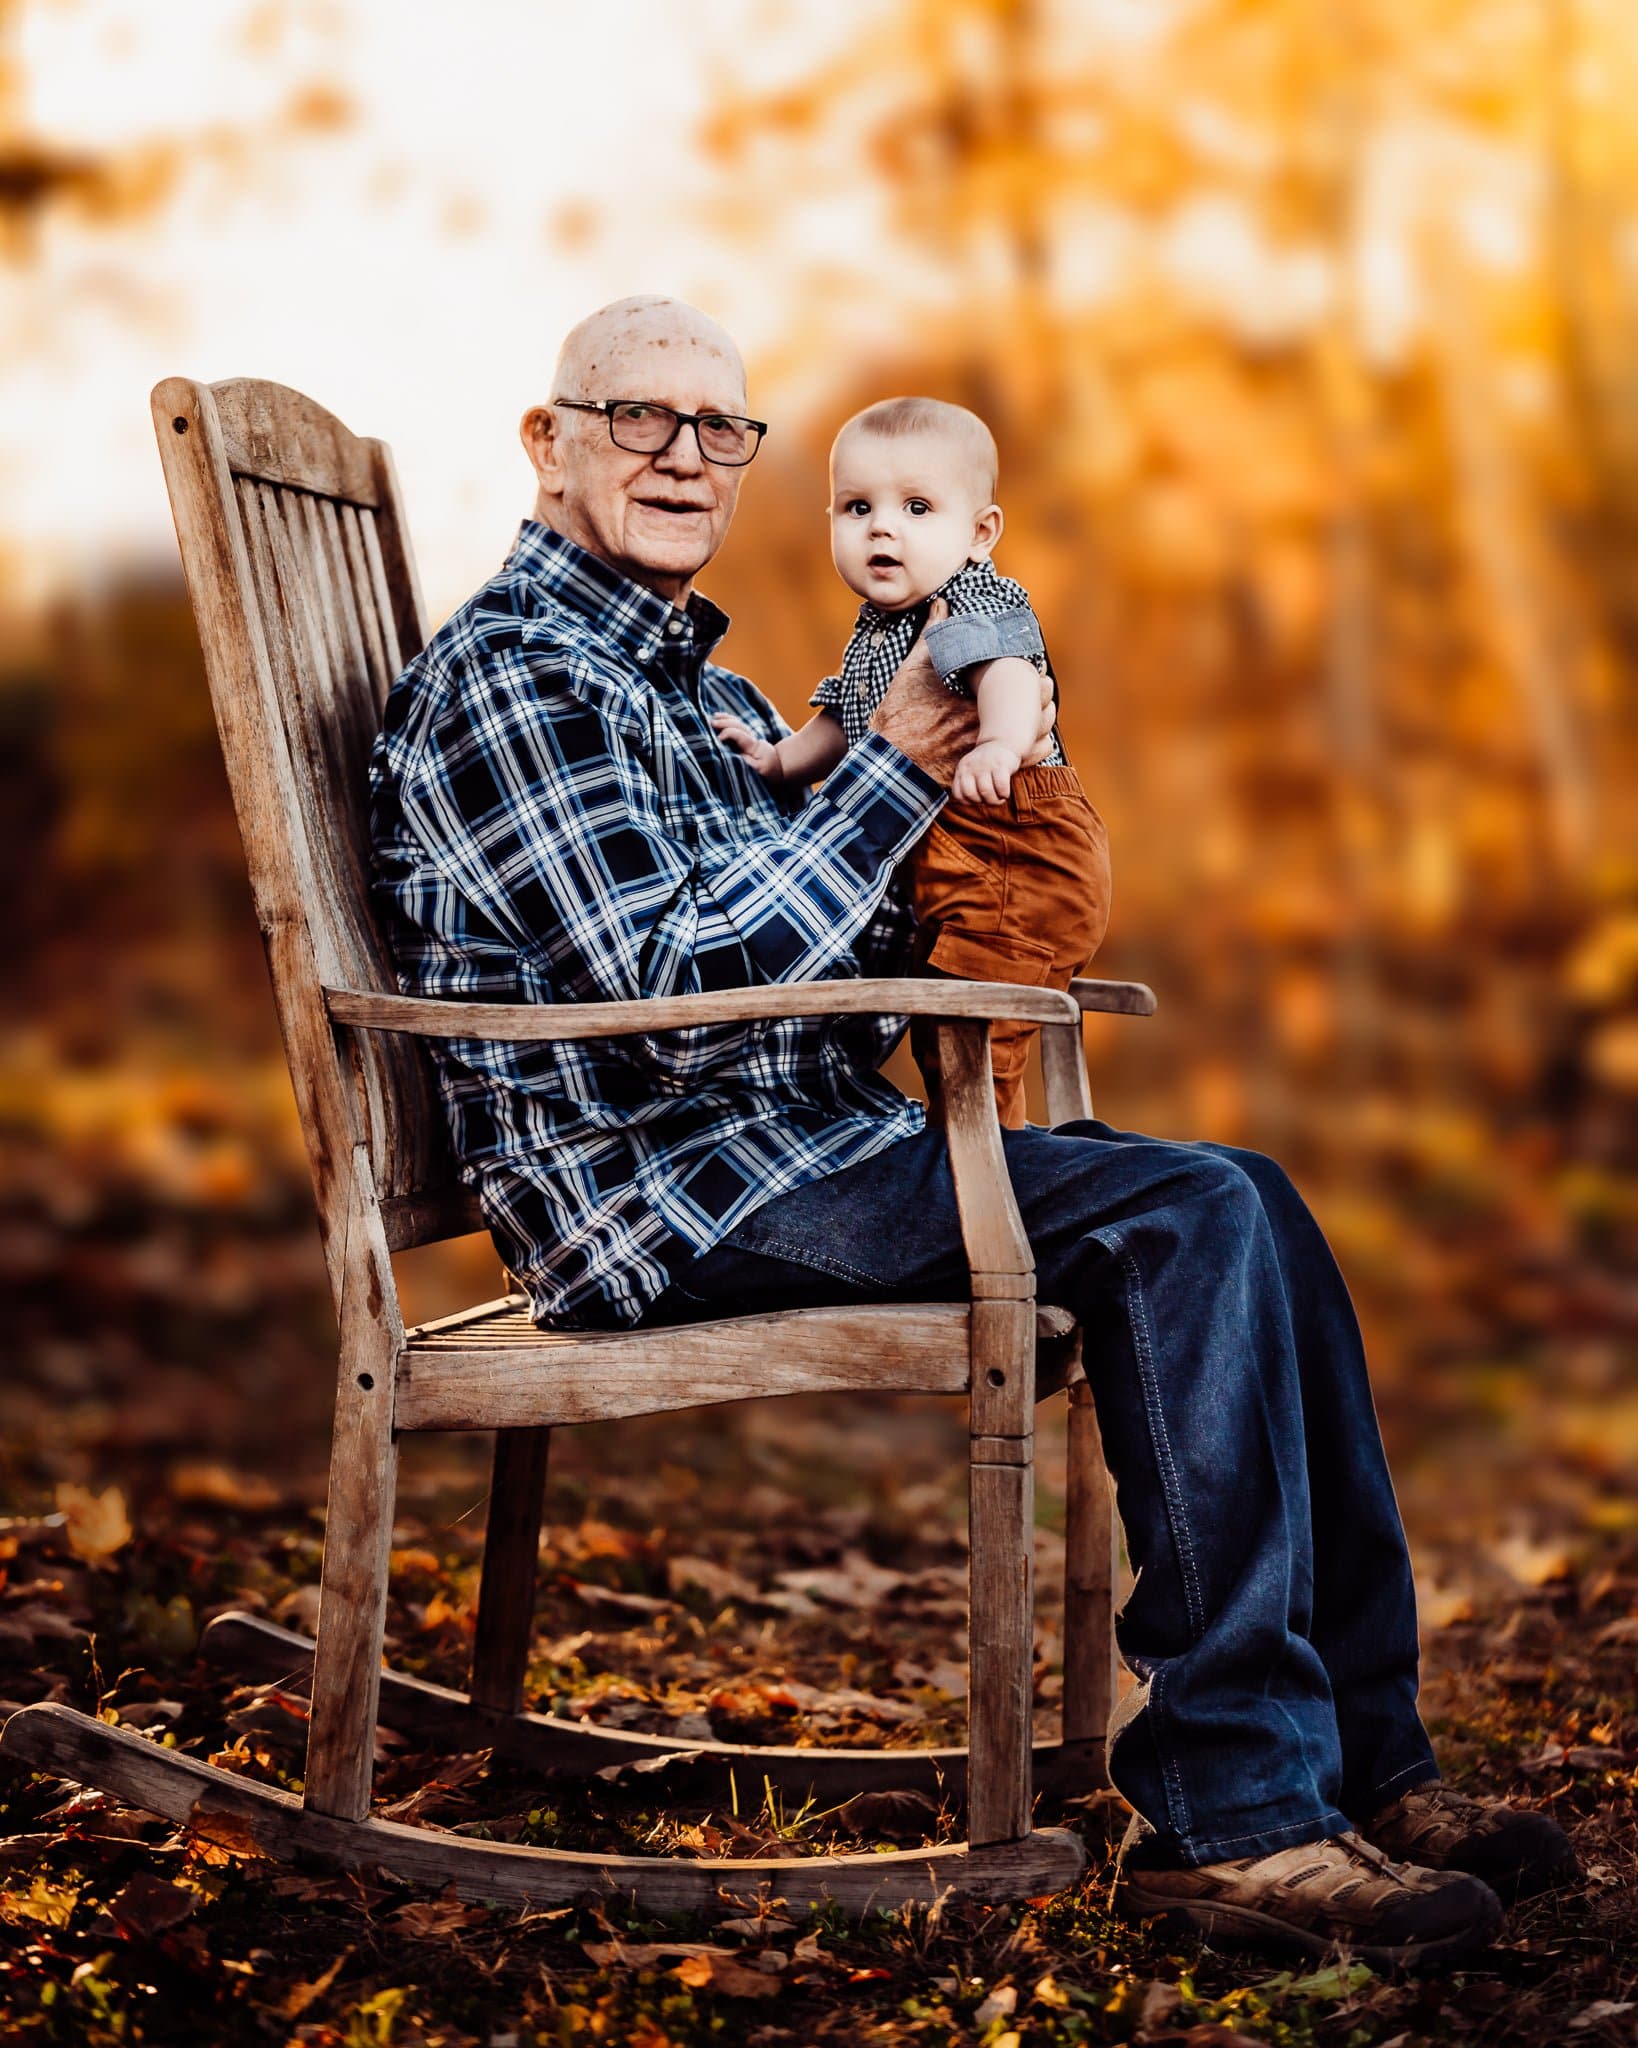 Grandfather sitting on rocking chair with baby